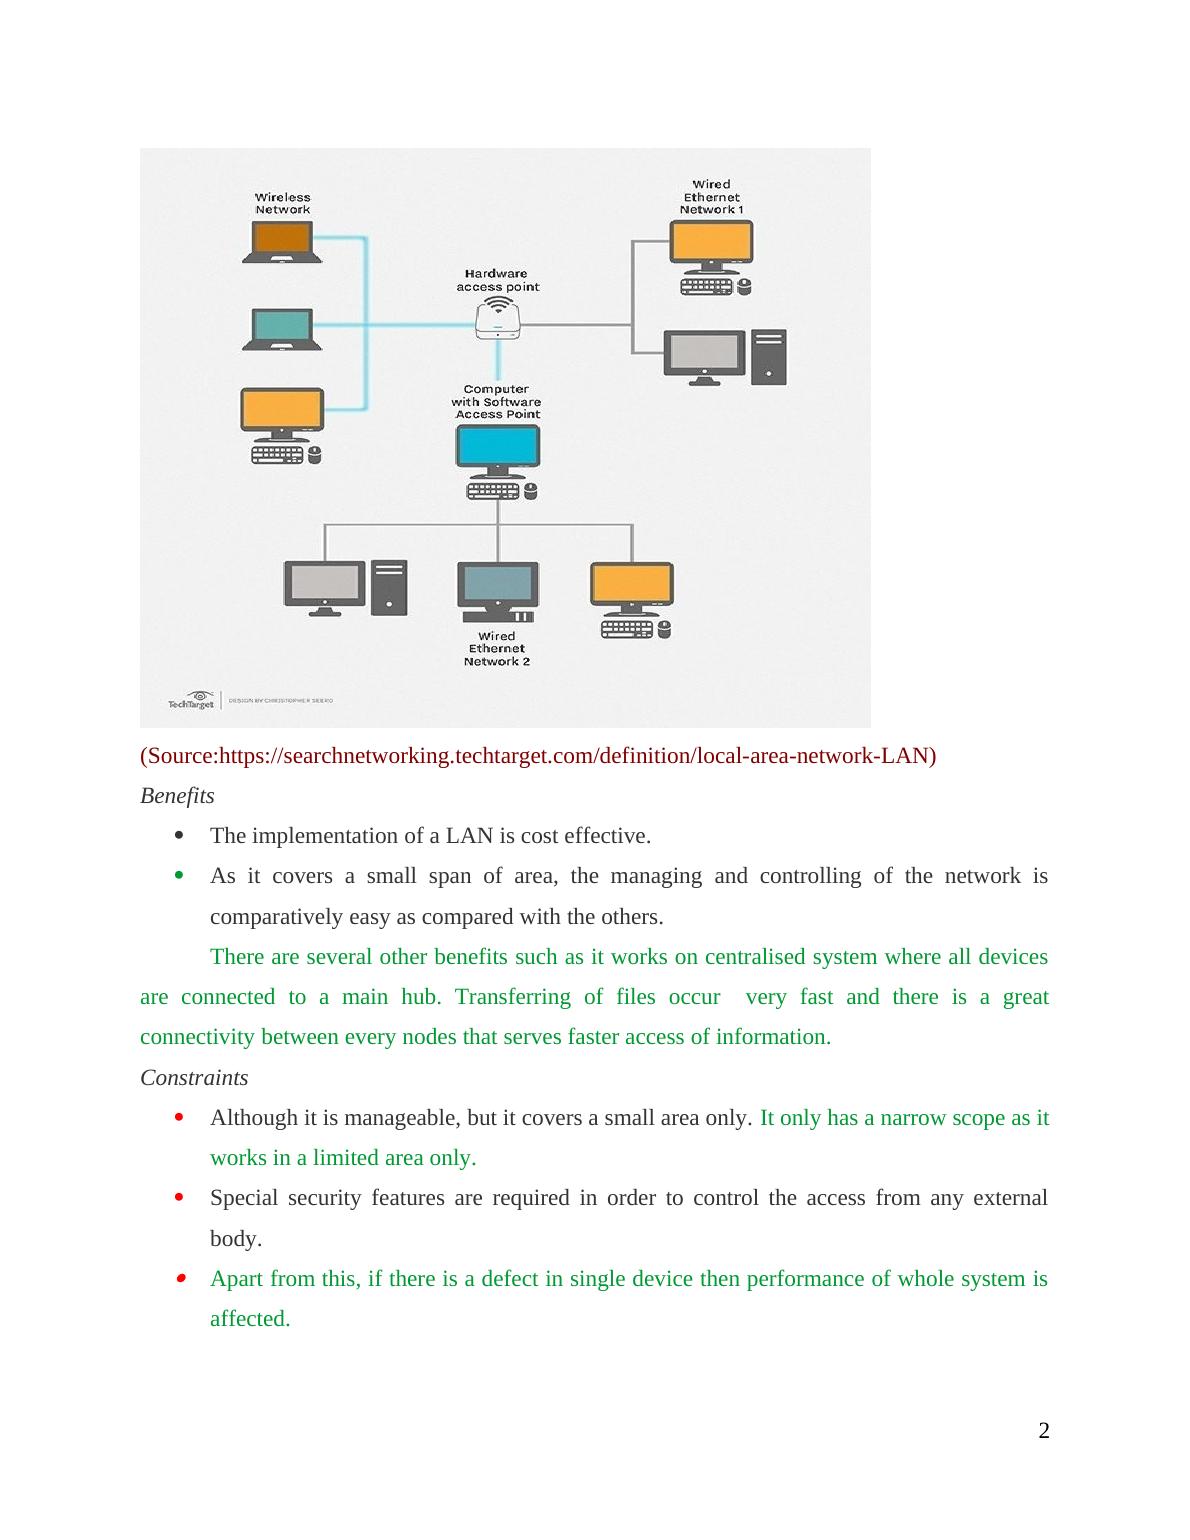 Report on Implementing New Network Infrastructure_4